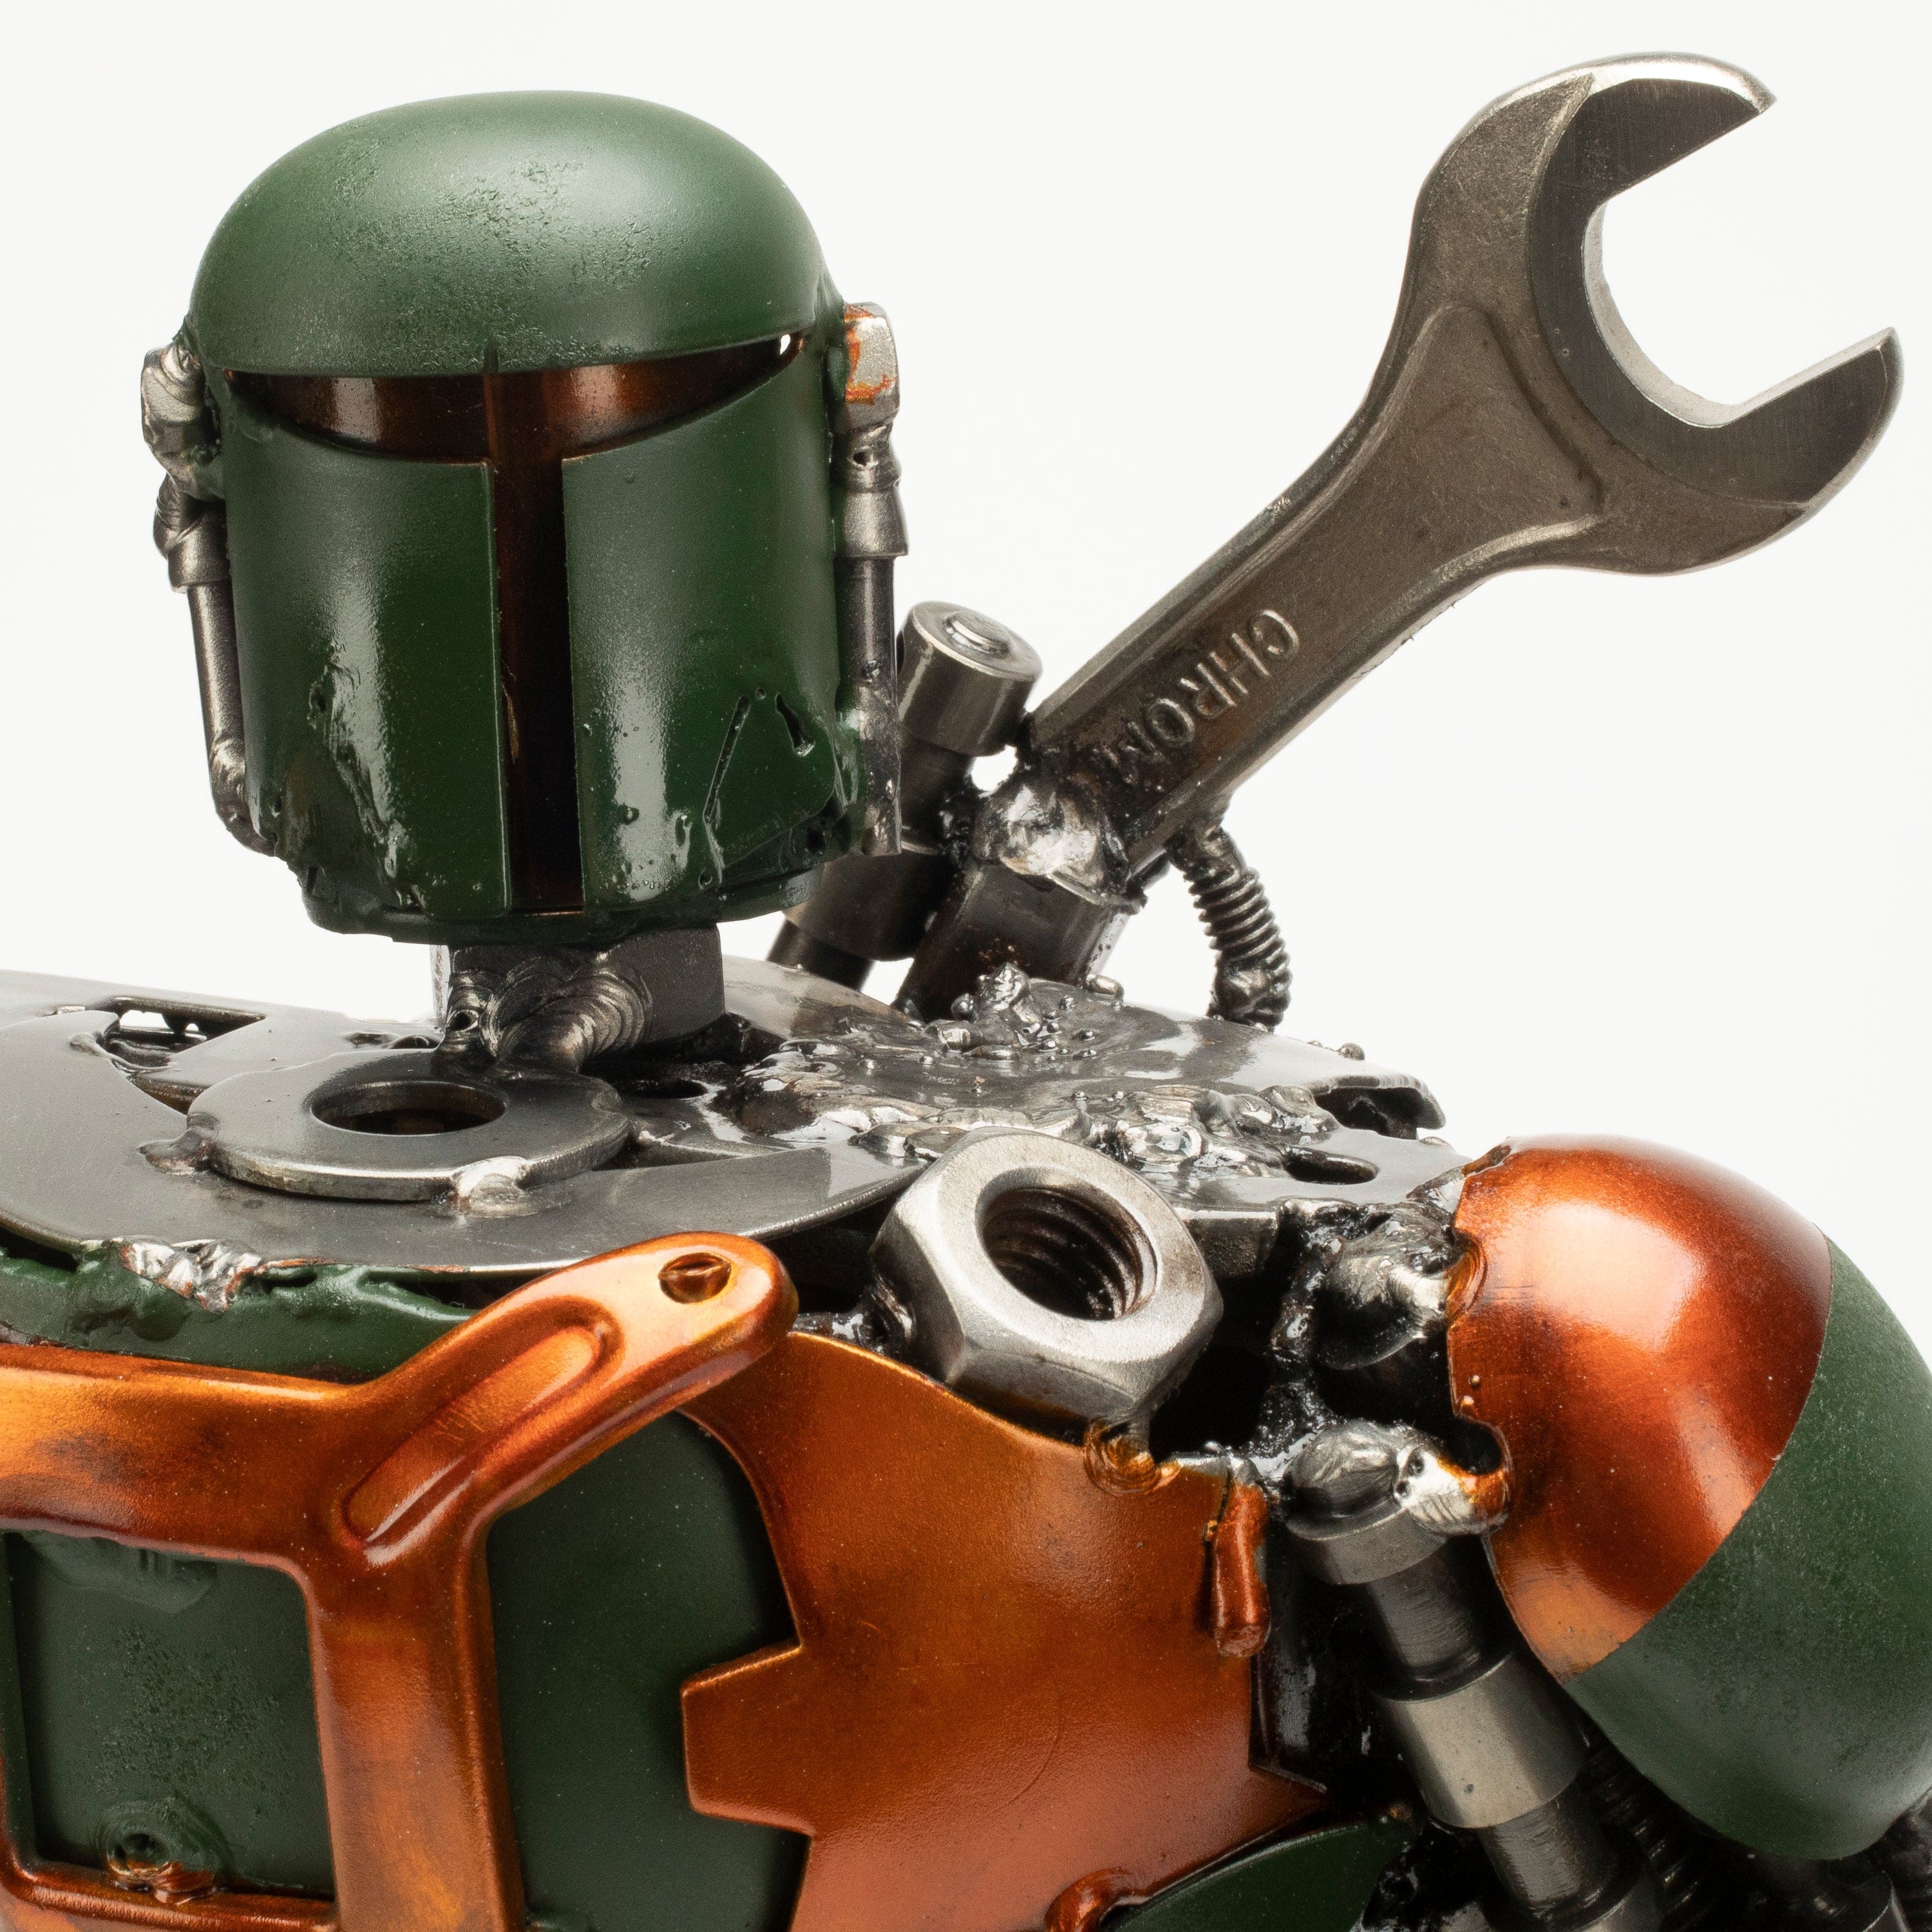 Kalifano Recycled Metal Art 20" Boba Fett with Blaster Inspired Recycled Metal Art Sculpture RMS-BF55-S